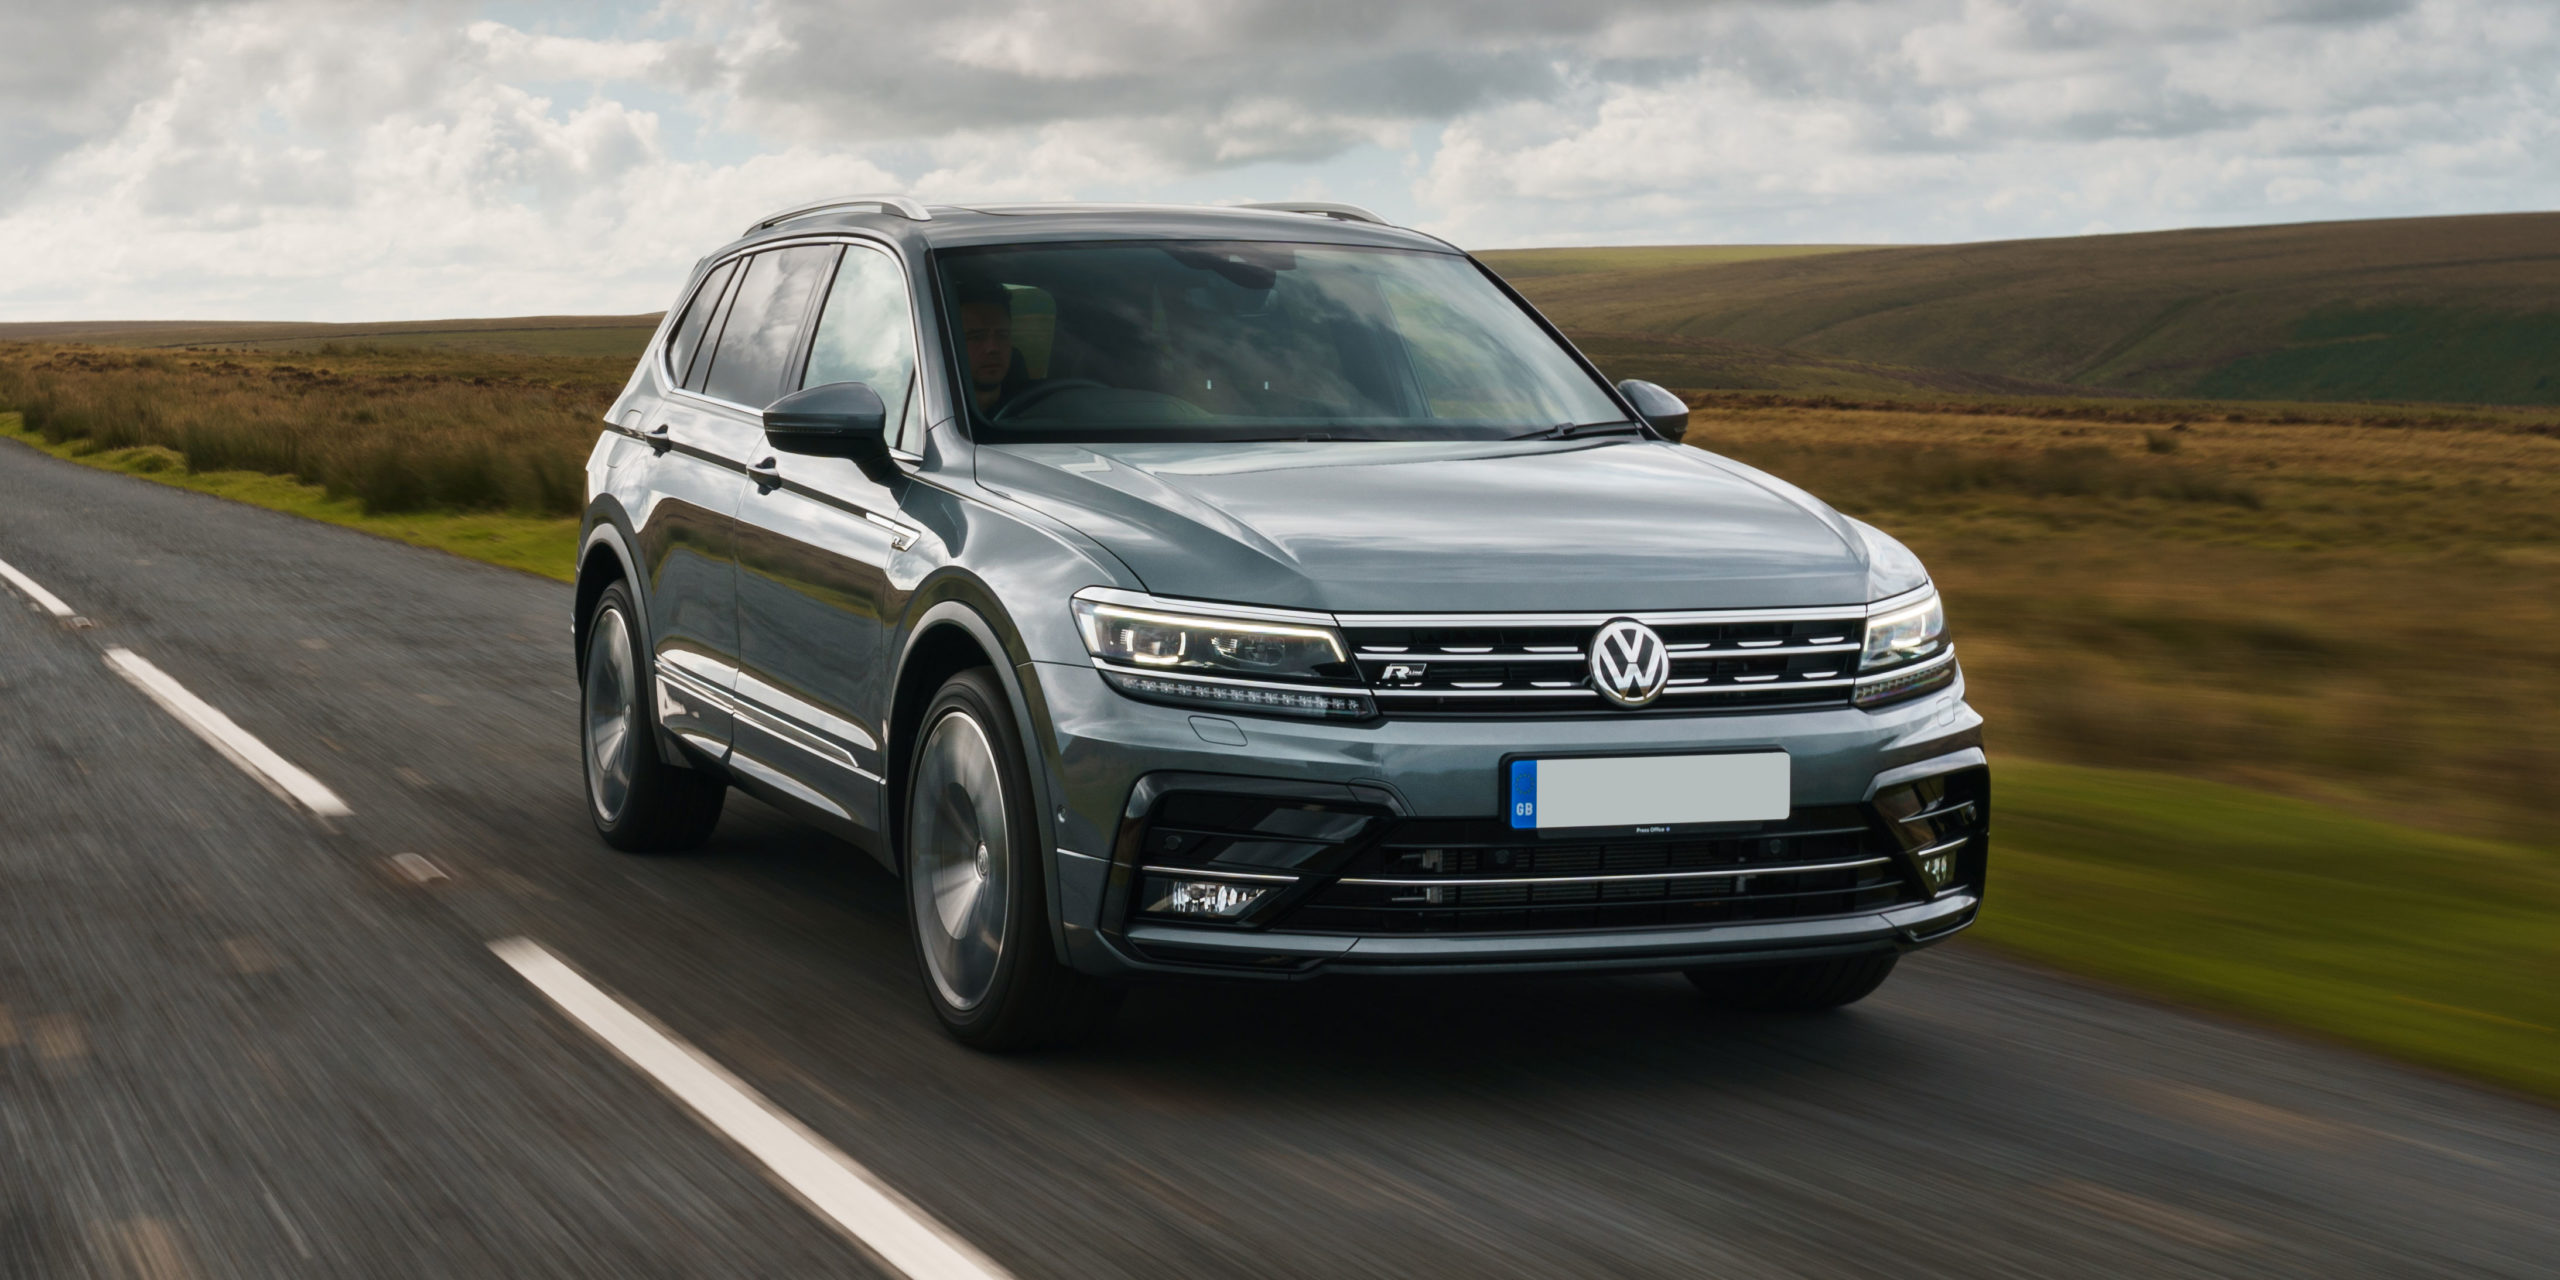 Review: Volkswagen's Tiguan is a dependable leader of the pack